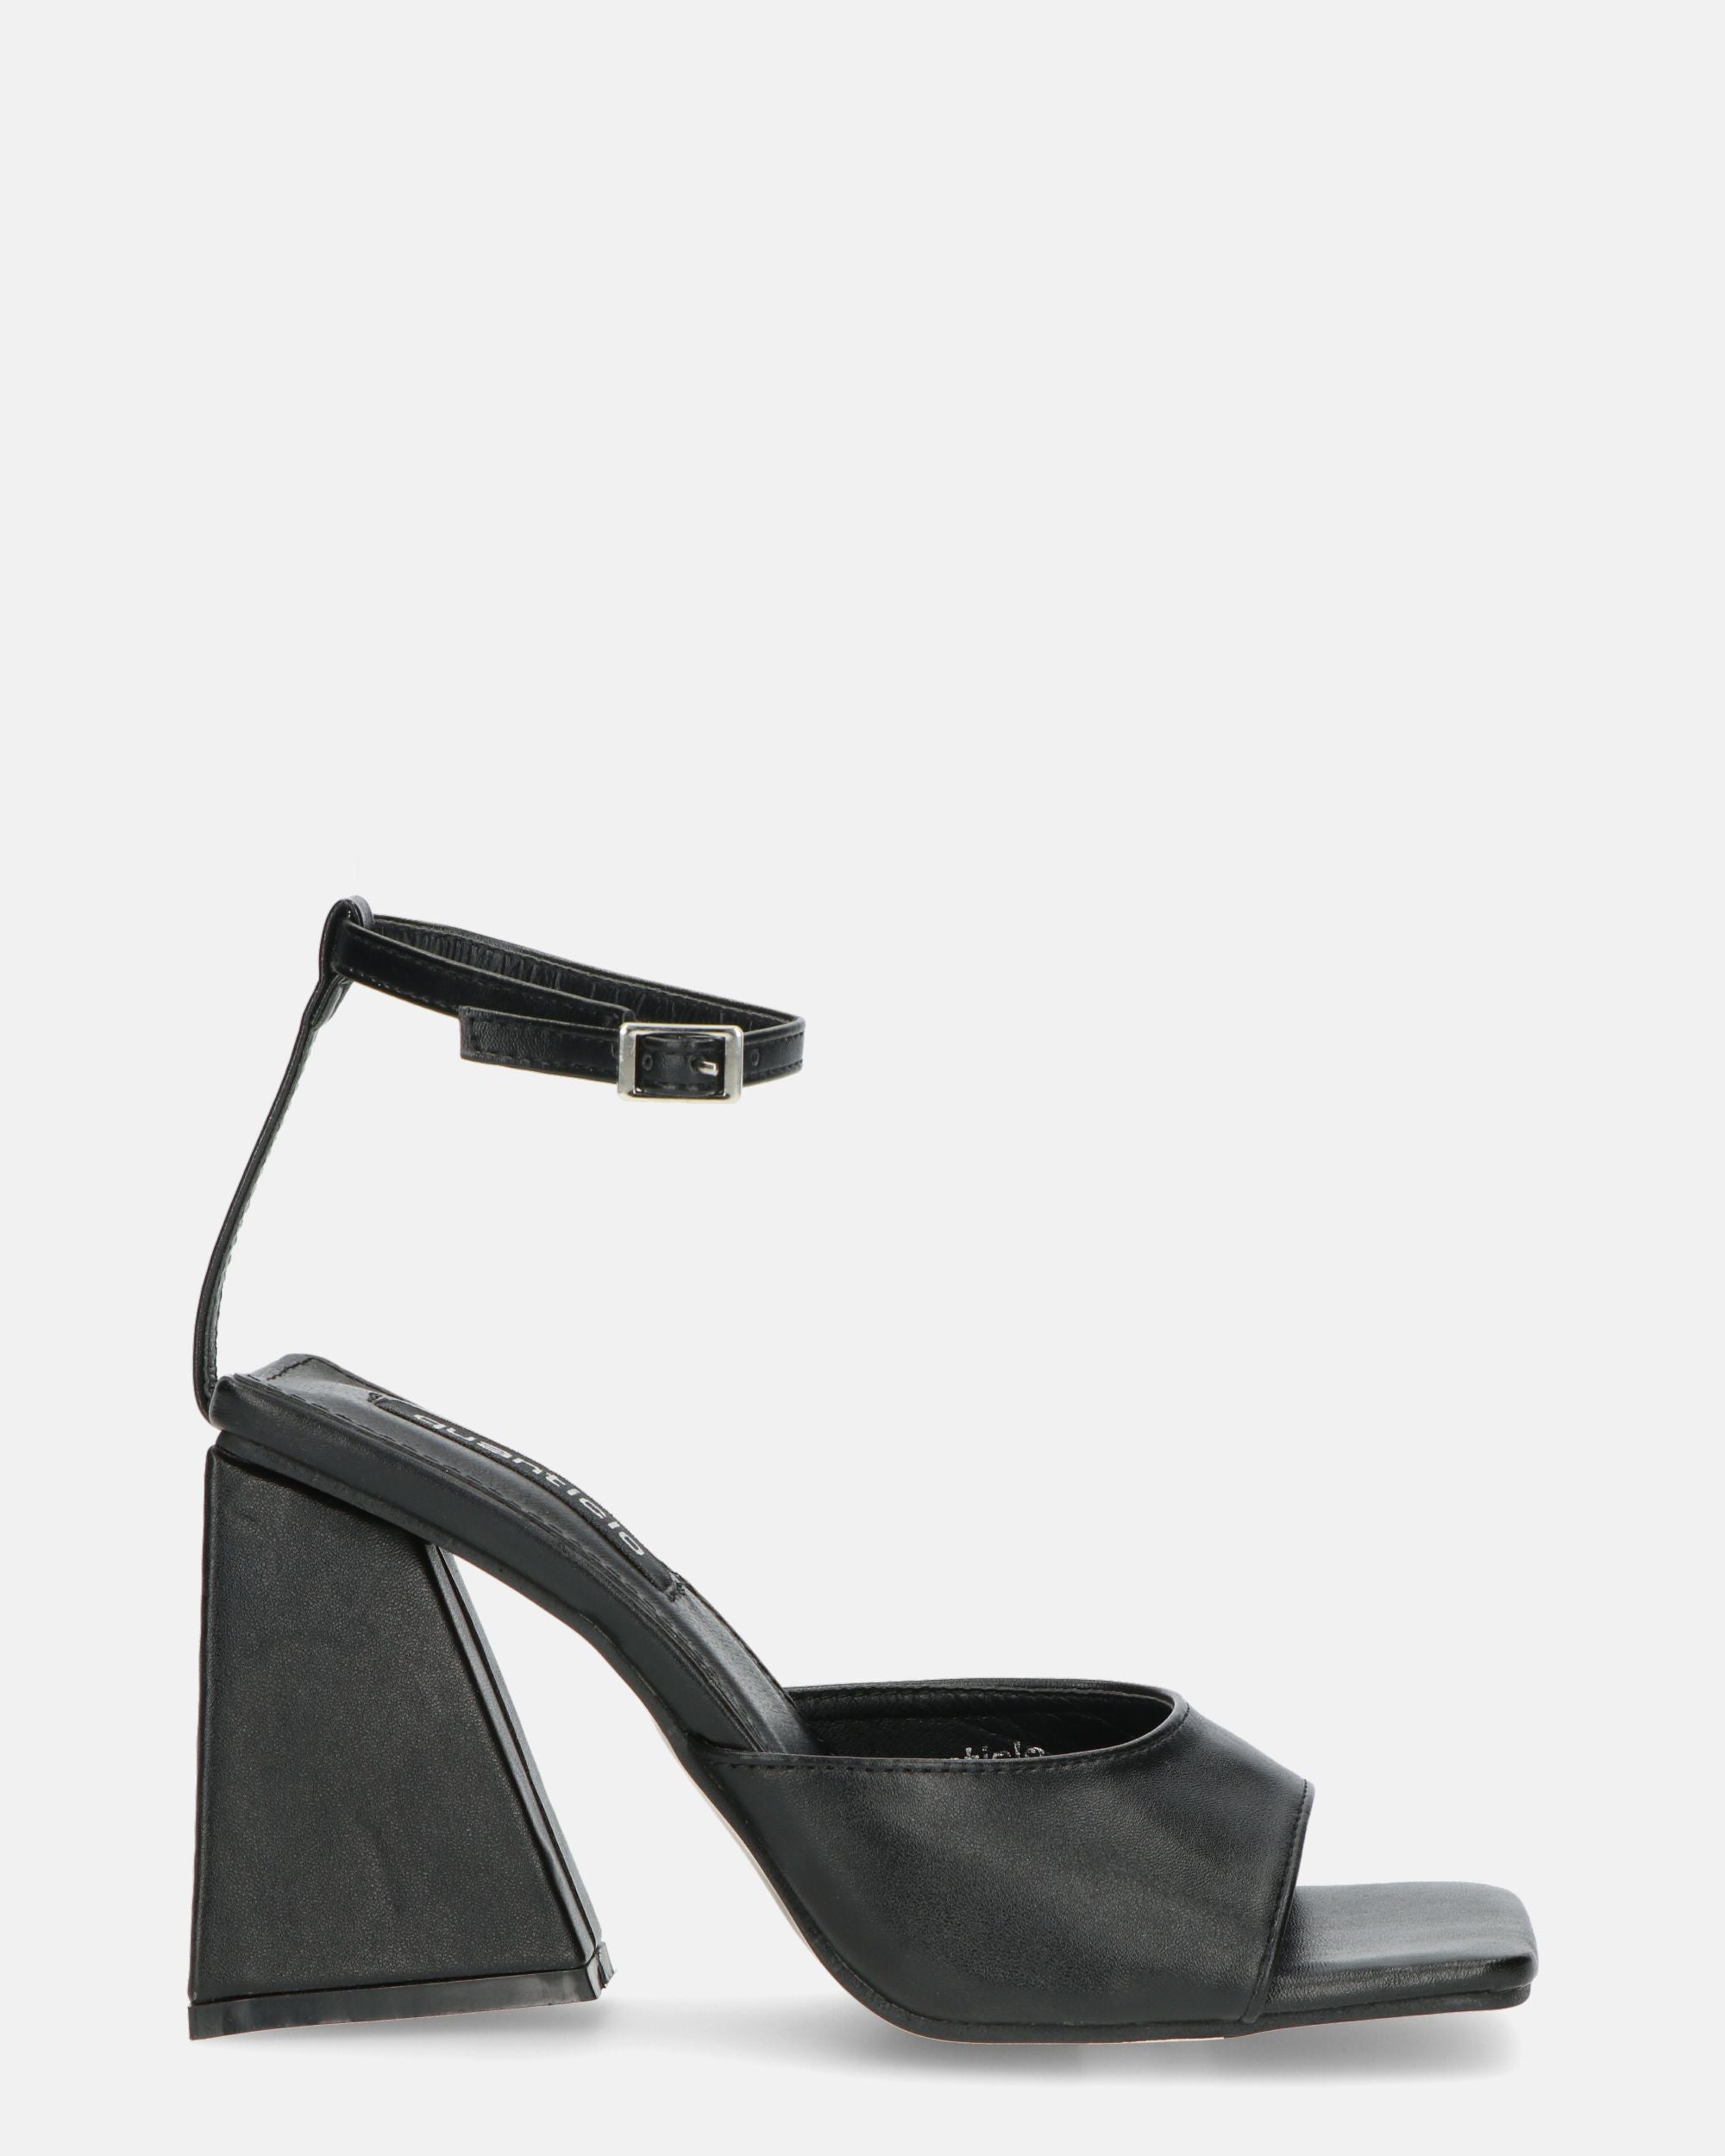 KUBRA - sandals with strap in black PU